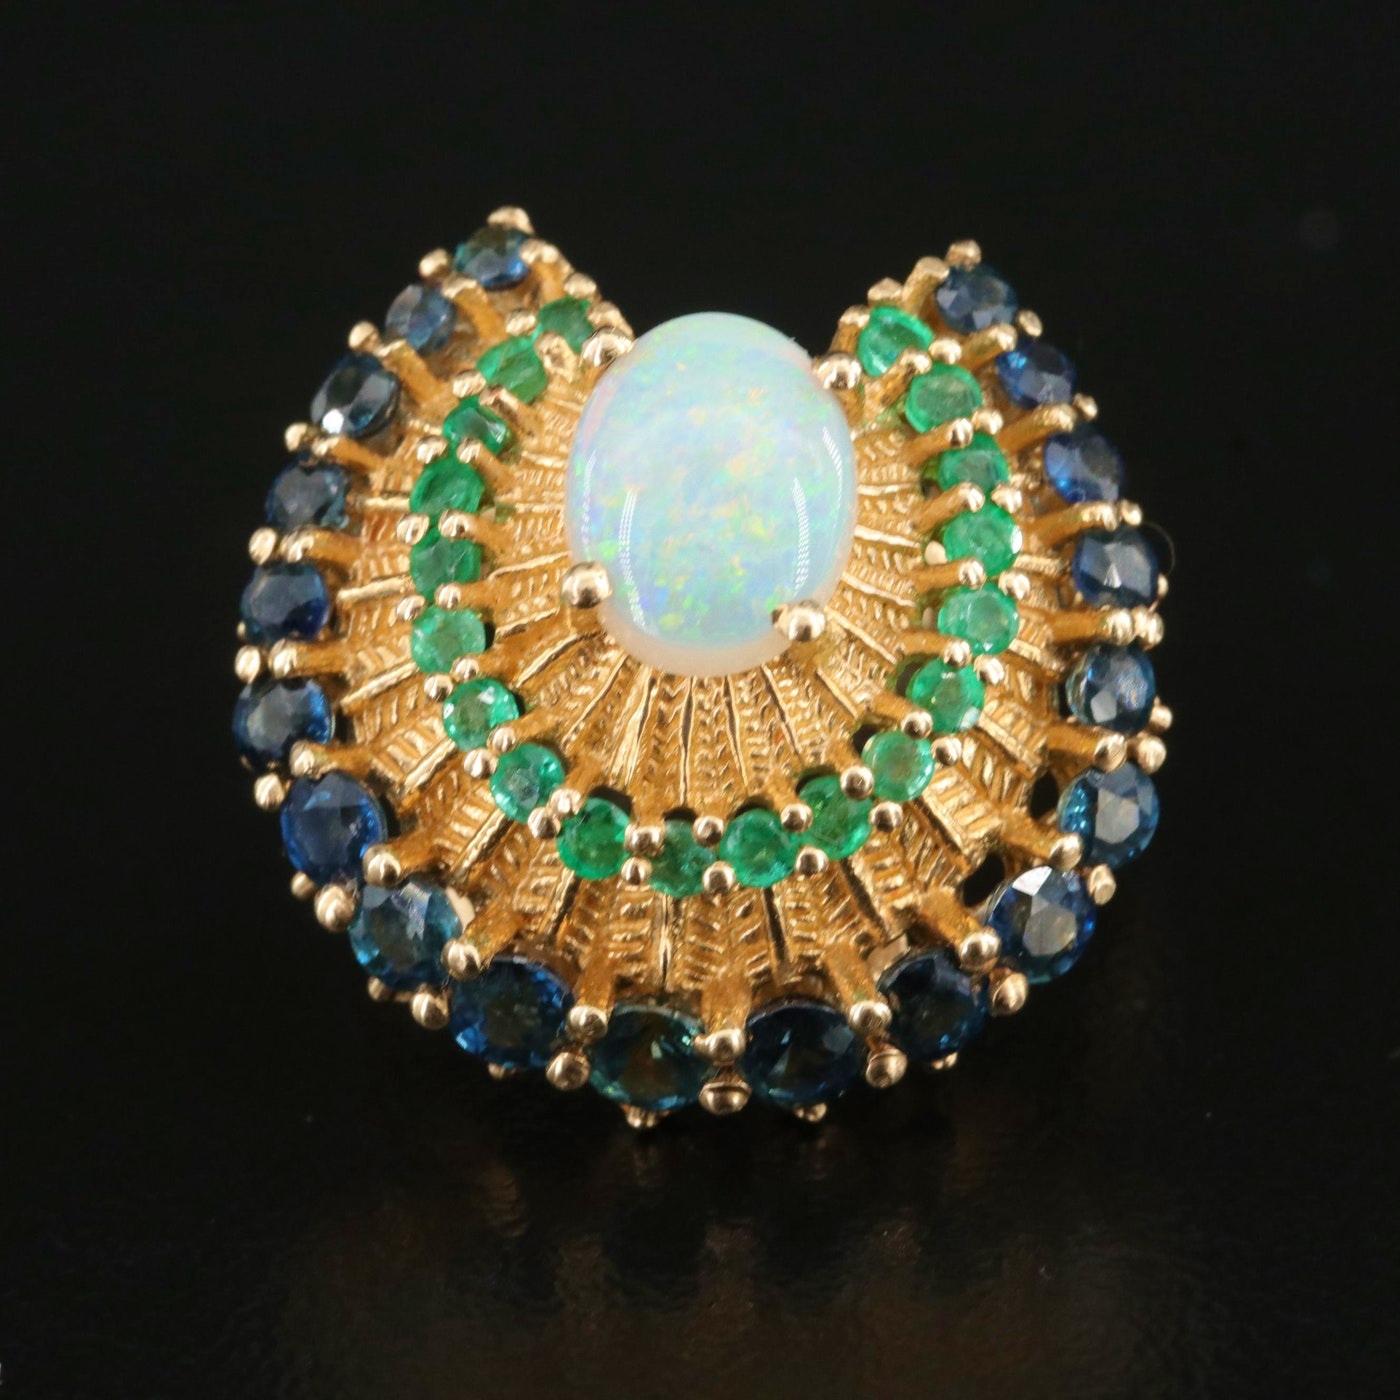 Princess Sumair Designer Ring - fully hallmarked (Franklin mint) Hallmarks: ©1988 FM 14K 585

The Gems of The Royal Peacock Ring, circa 1988 

NEW OLD STOCK

Opal, Emerald and Blue Sapphire, all natural and top quality

14K Yellow gold, stamped